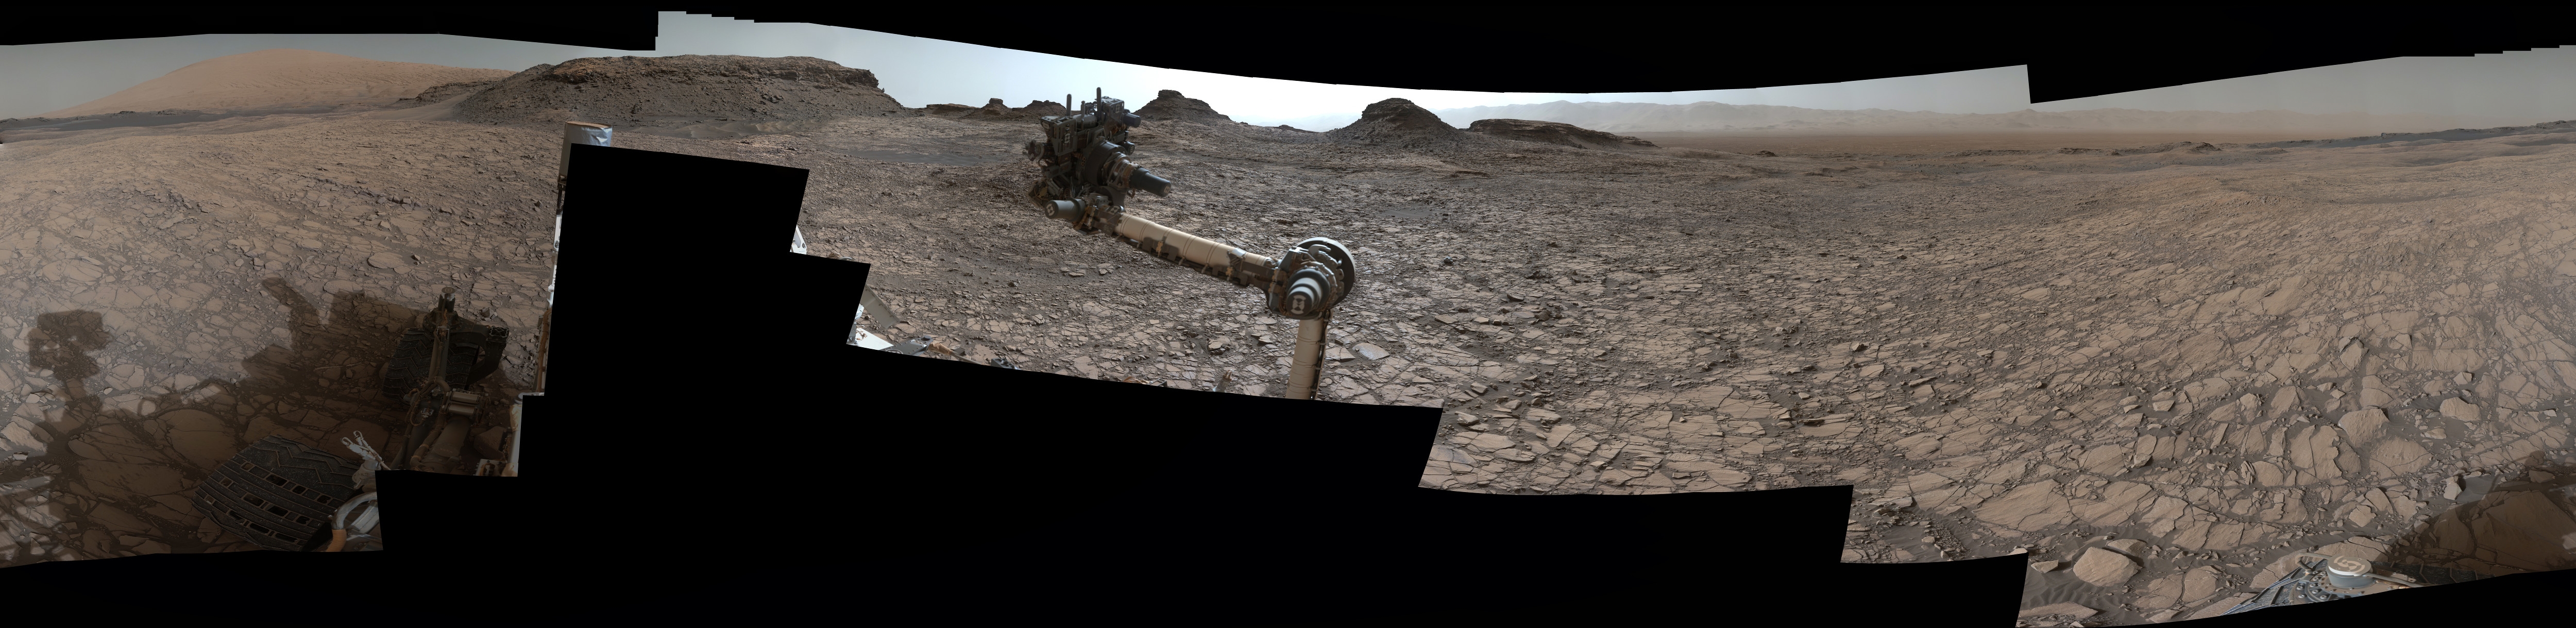 is_curiosity_panomara_at_murray_buttes_5000px.jpg